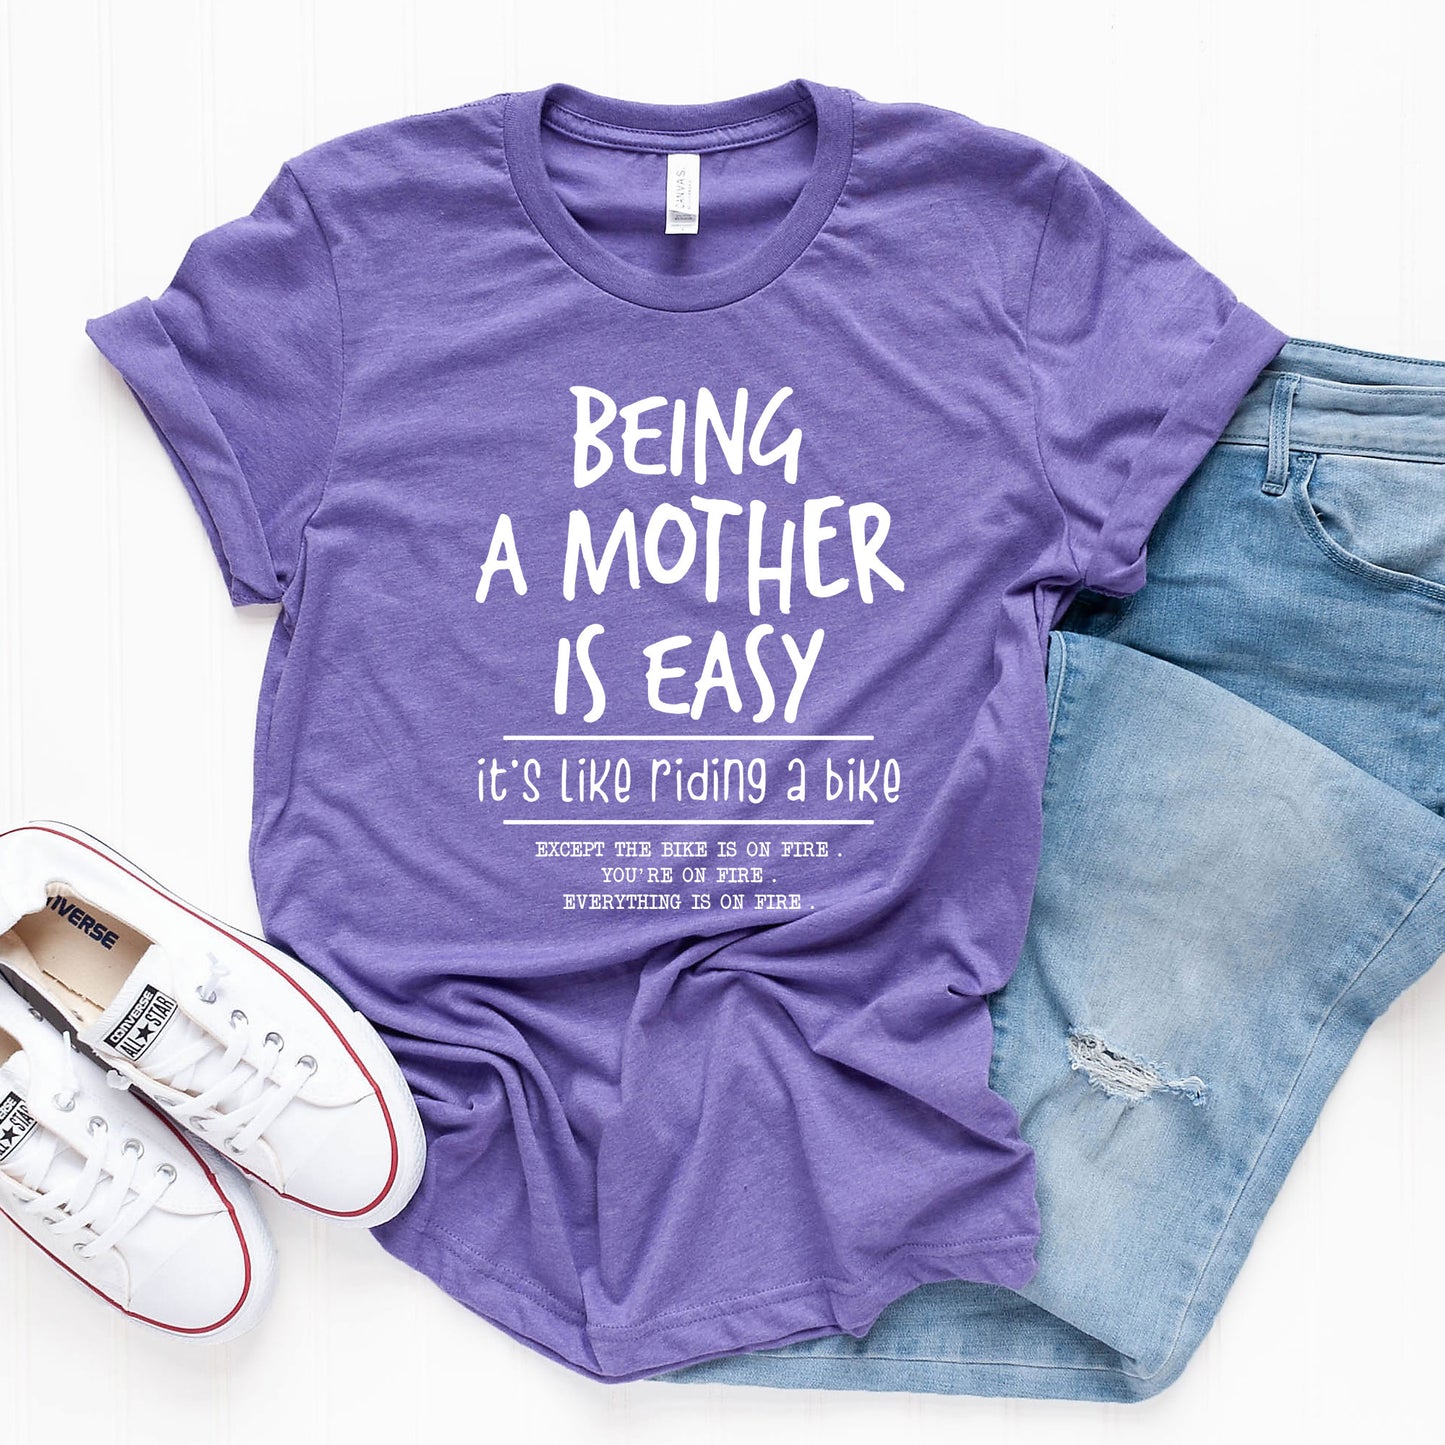 Being A Mother Is Easy | Short Sleeve Crew Neck